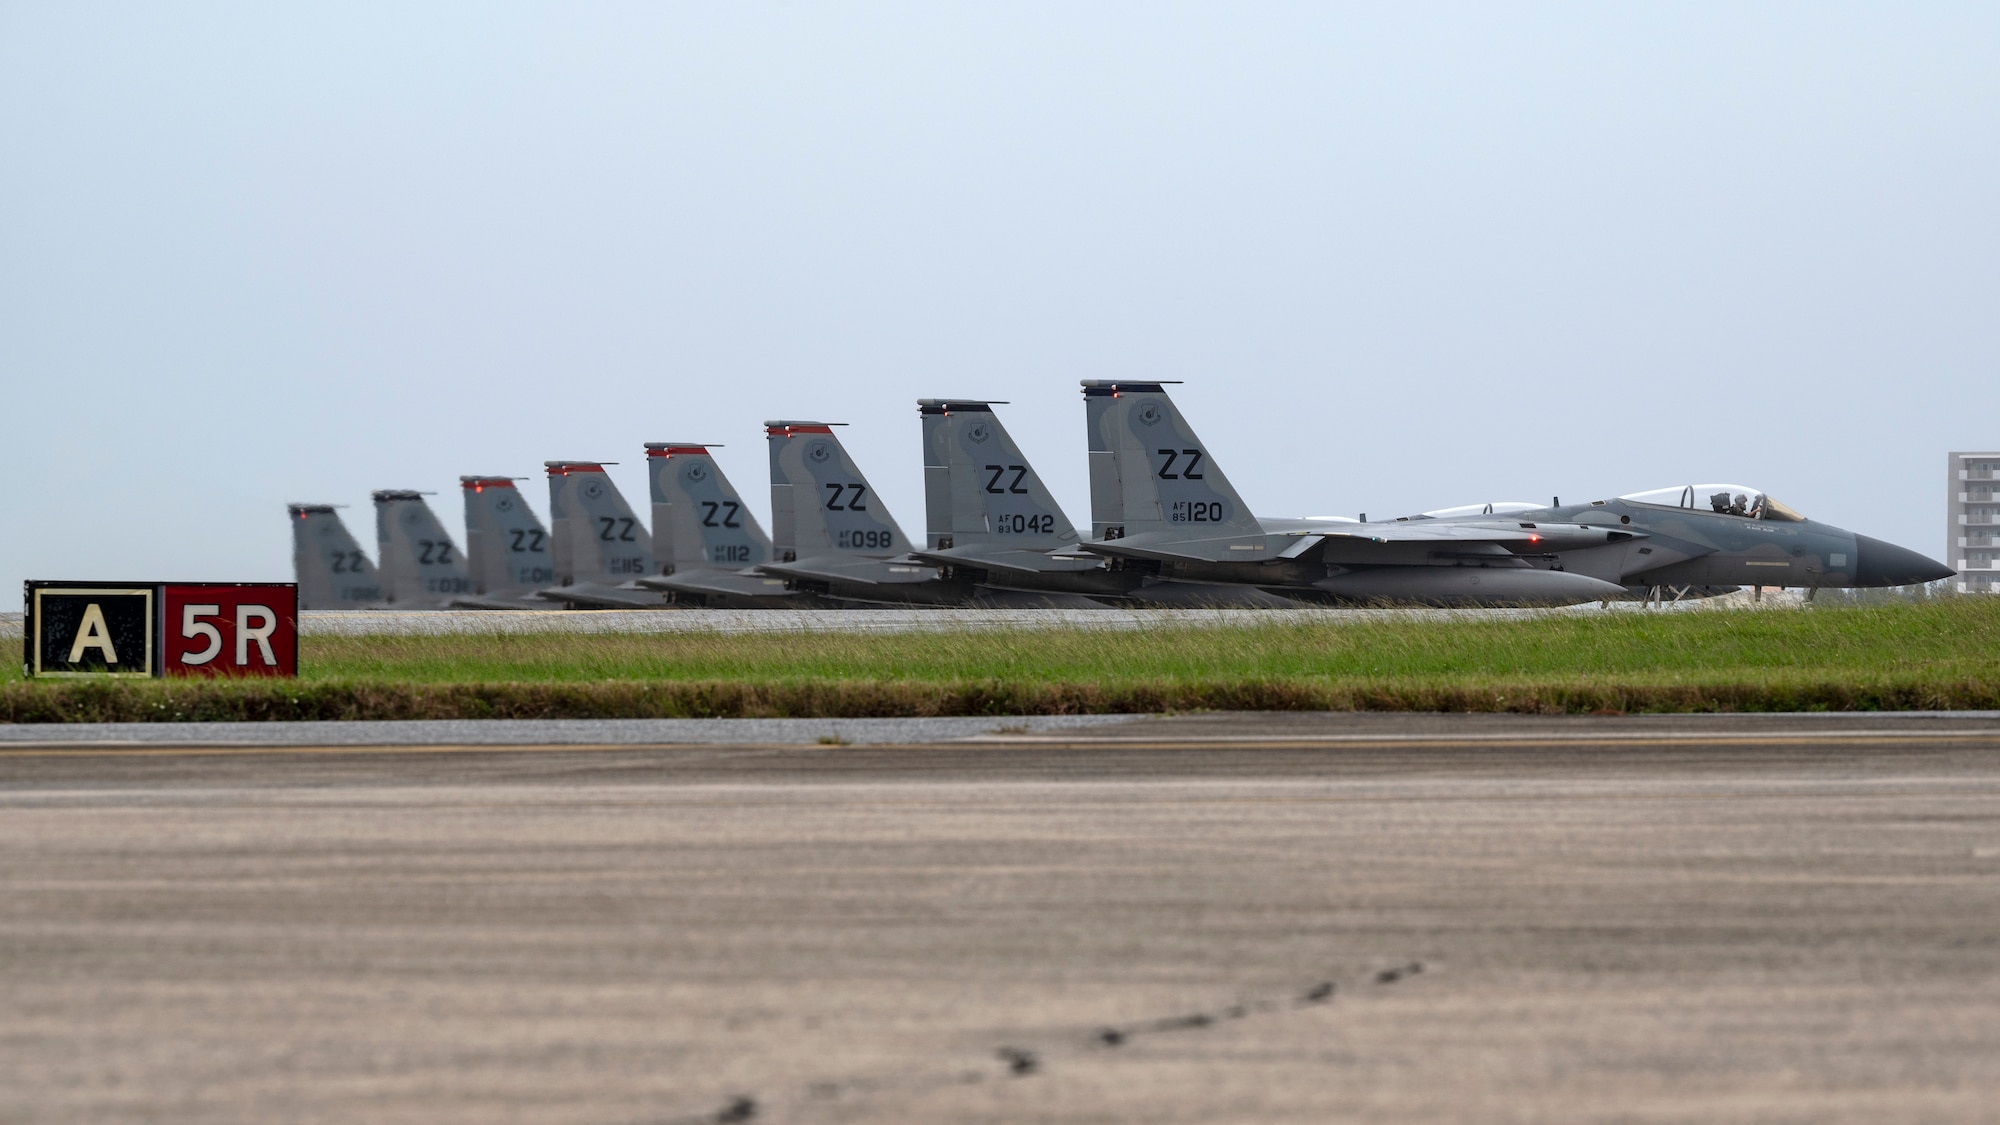 U.S. Air Force F-15C Eagles assigned to the 44th and 67th Fighter Squadrons await clearance for their last take-off from Kadena Air Base, Japan, Dec. 1, 2022. As a part of its modernization plan, the 18th Wing is retiring its aging fleet of F-15C/D Eagles that have been in service for more than four decades. (U.S. Air Force photo by Senior Airman Jessi Roth)